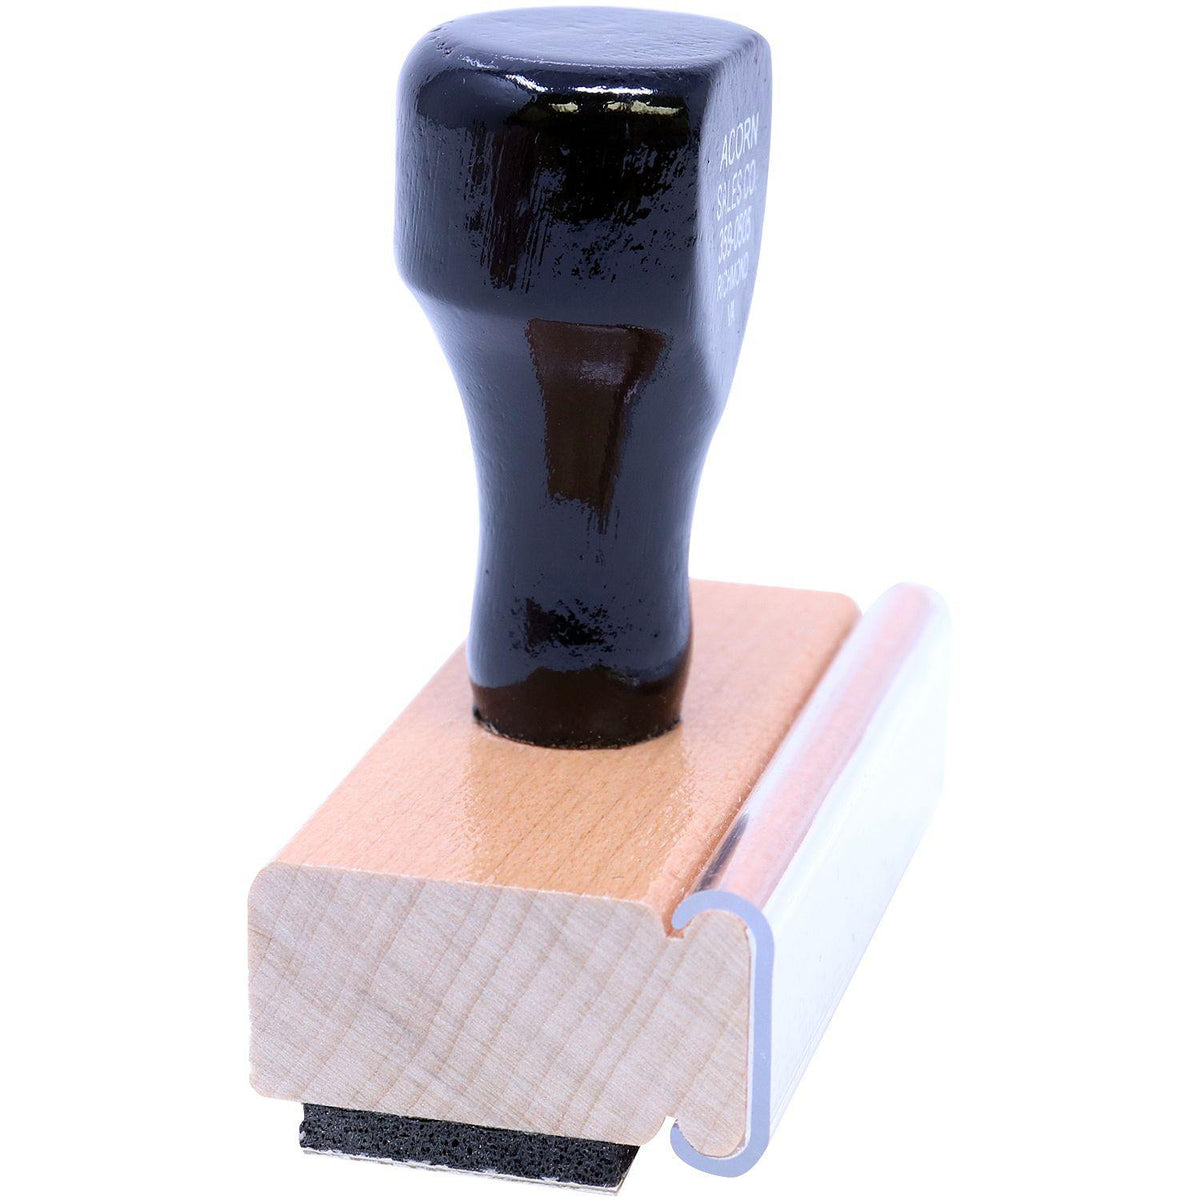 Side View of Corrected Rubber Stamp at an Angle